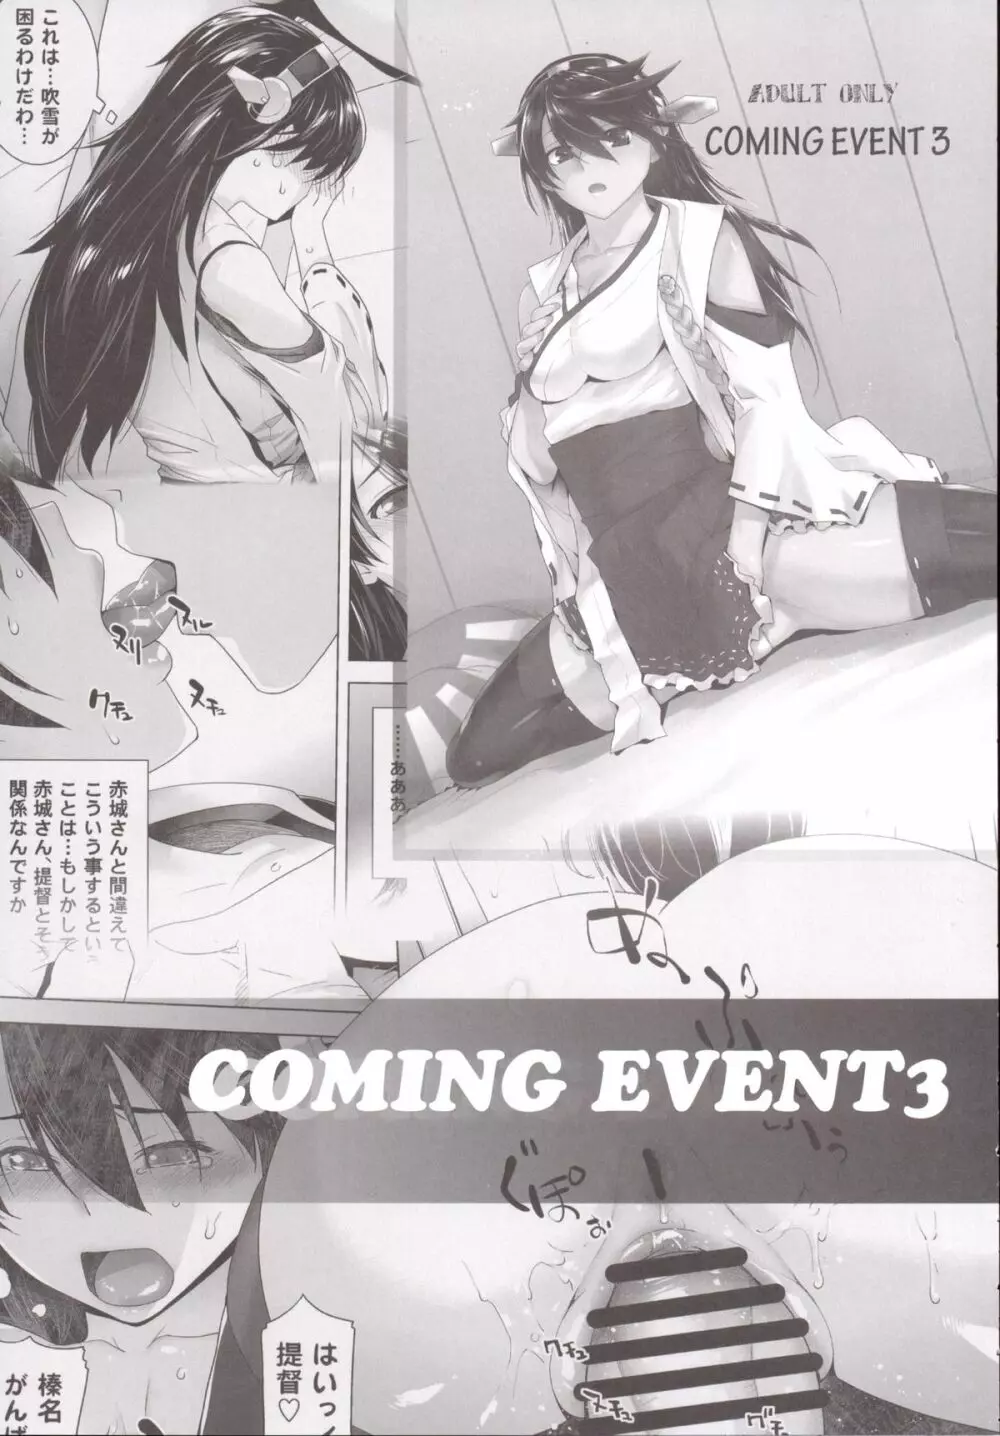 COMING EVENT 4 Page.26